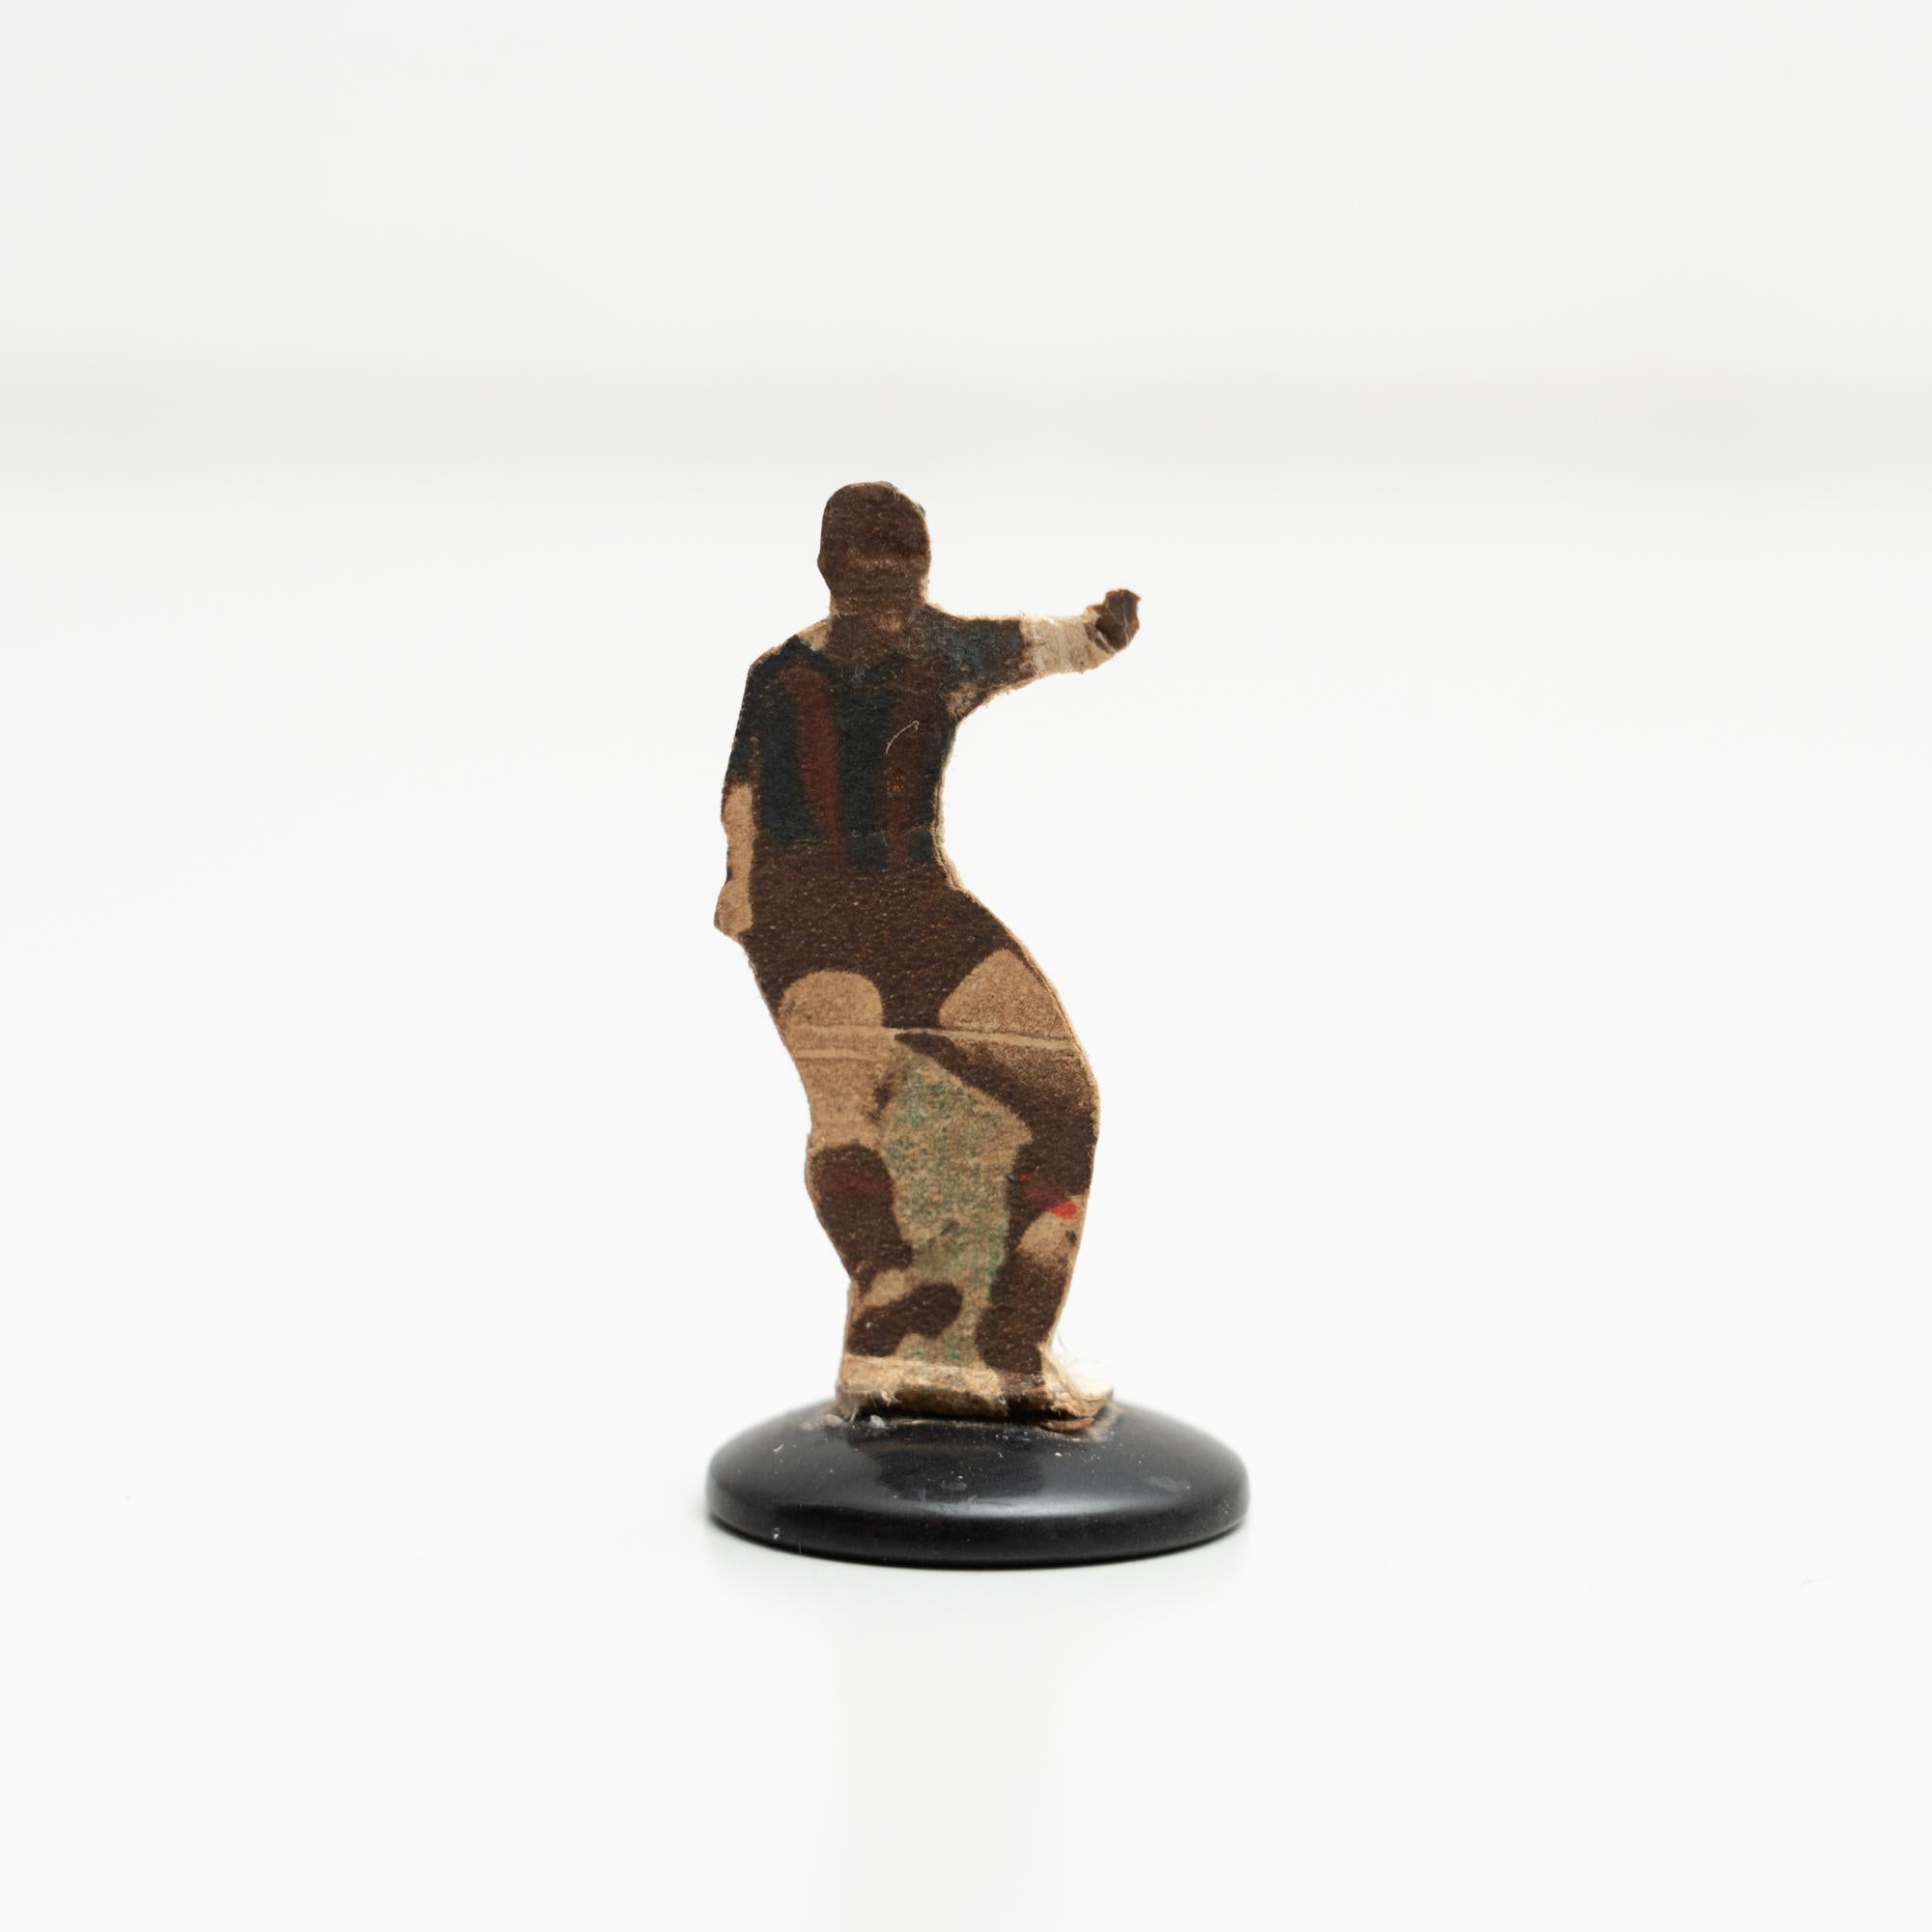 Table button soccer game player. Traditional figure used to play this classic button Spanish game. The figure is usually made by attaching a football player photograph, or sometimes a drawing, attached to a clothing button.

Manufactured in Spain,